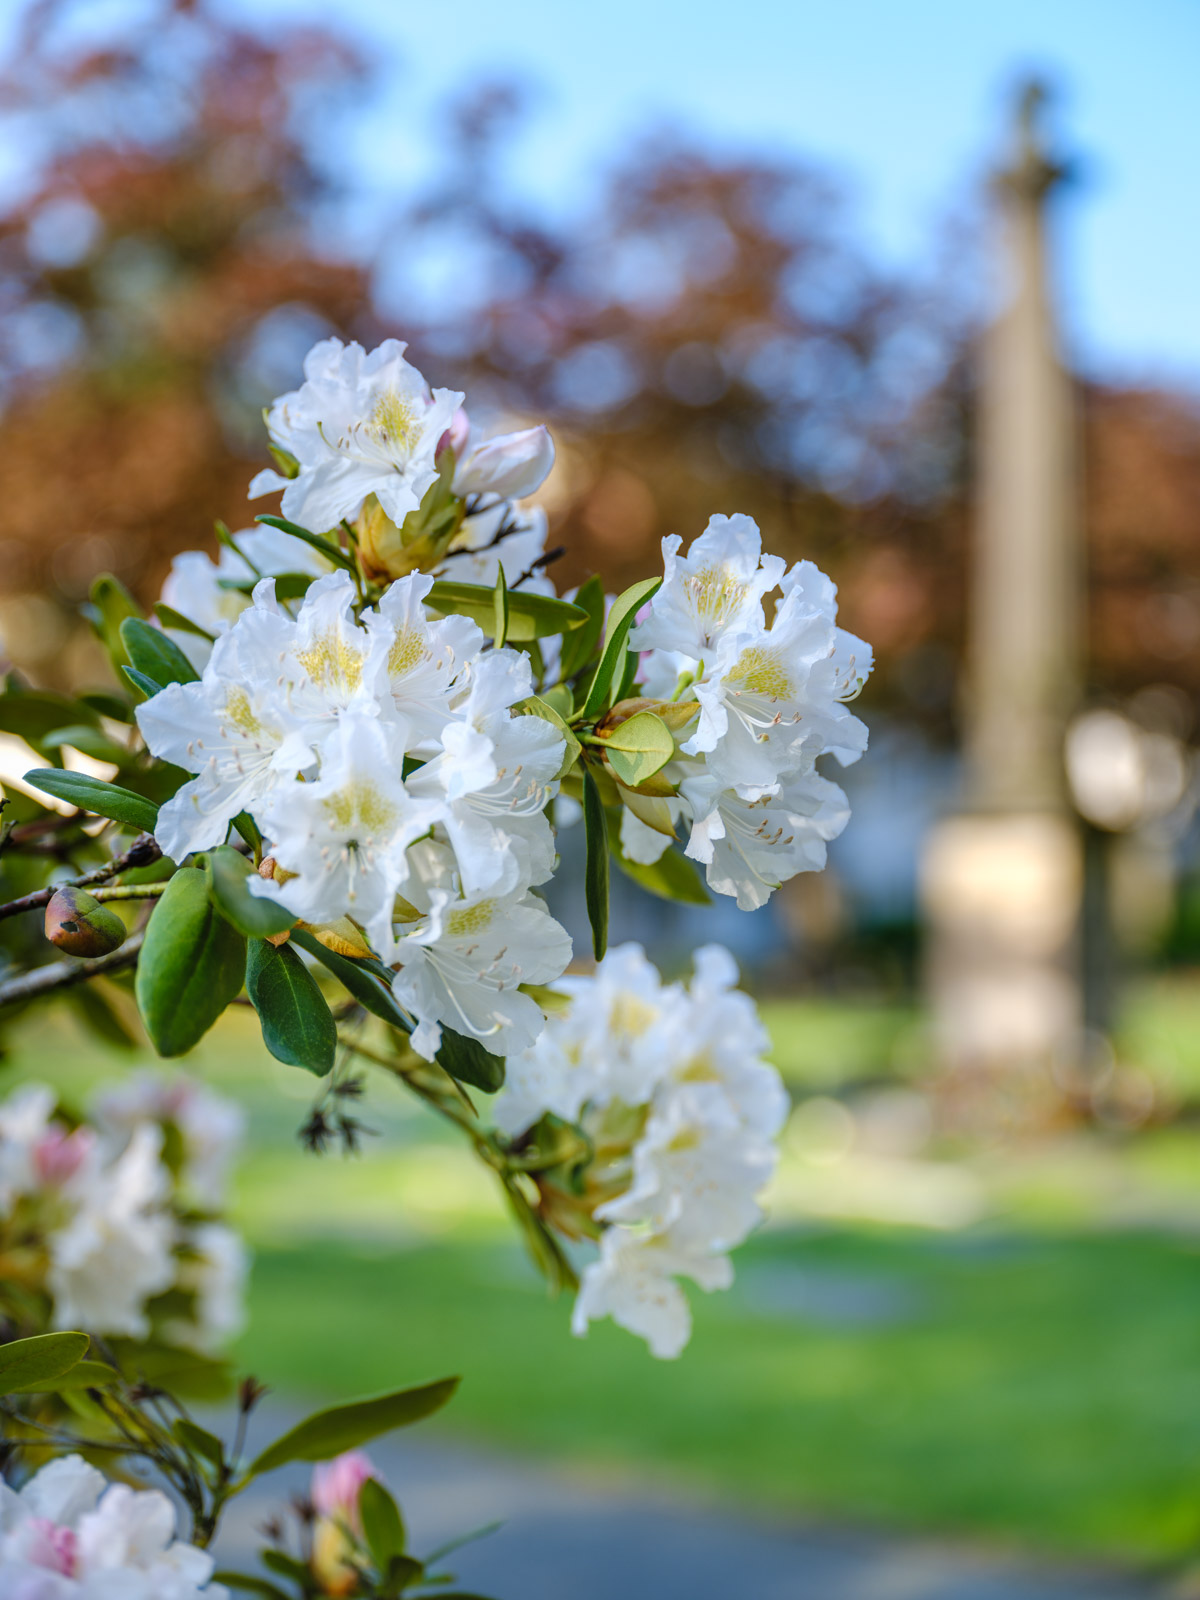 White rhododendron at the Old Cemetery on an early morning in May 2021 (Bielefeld, Germany).